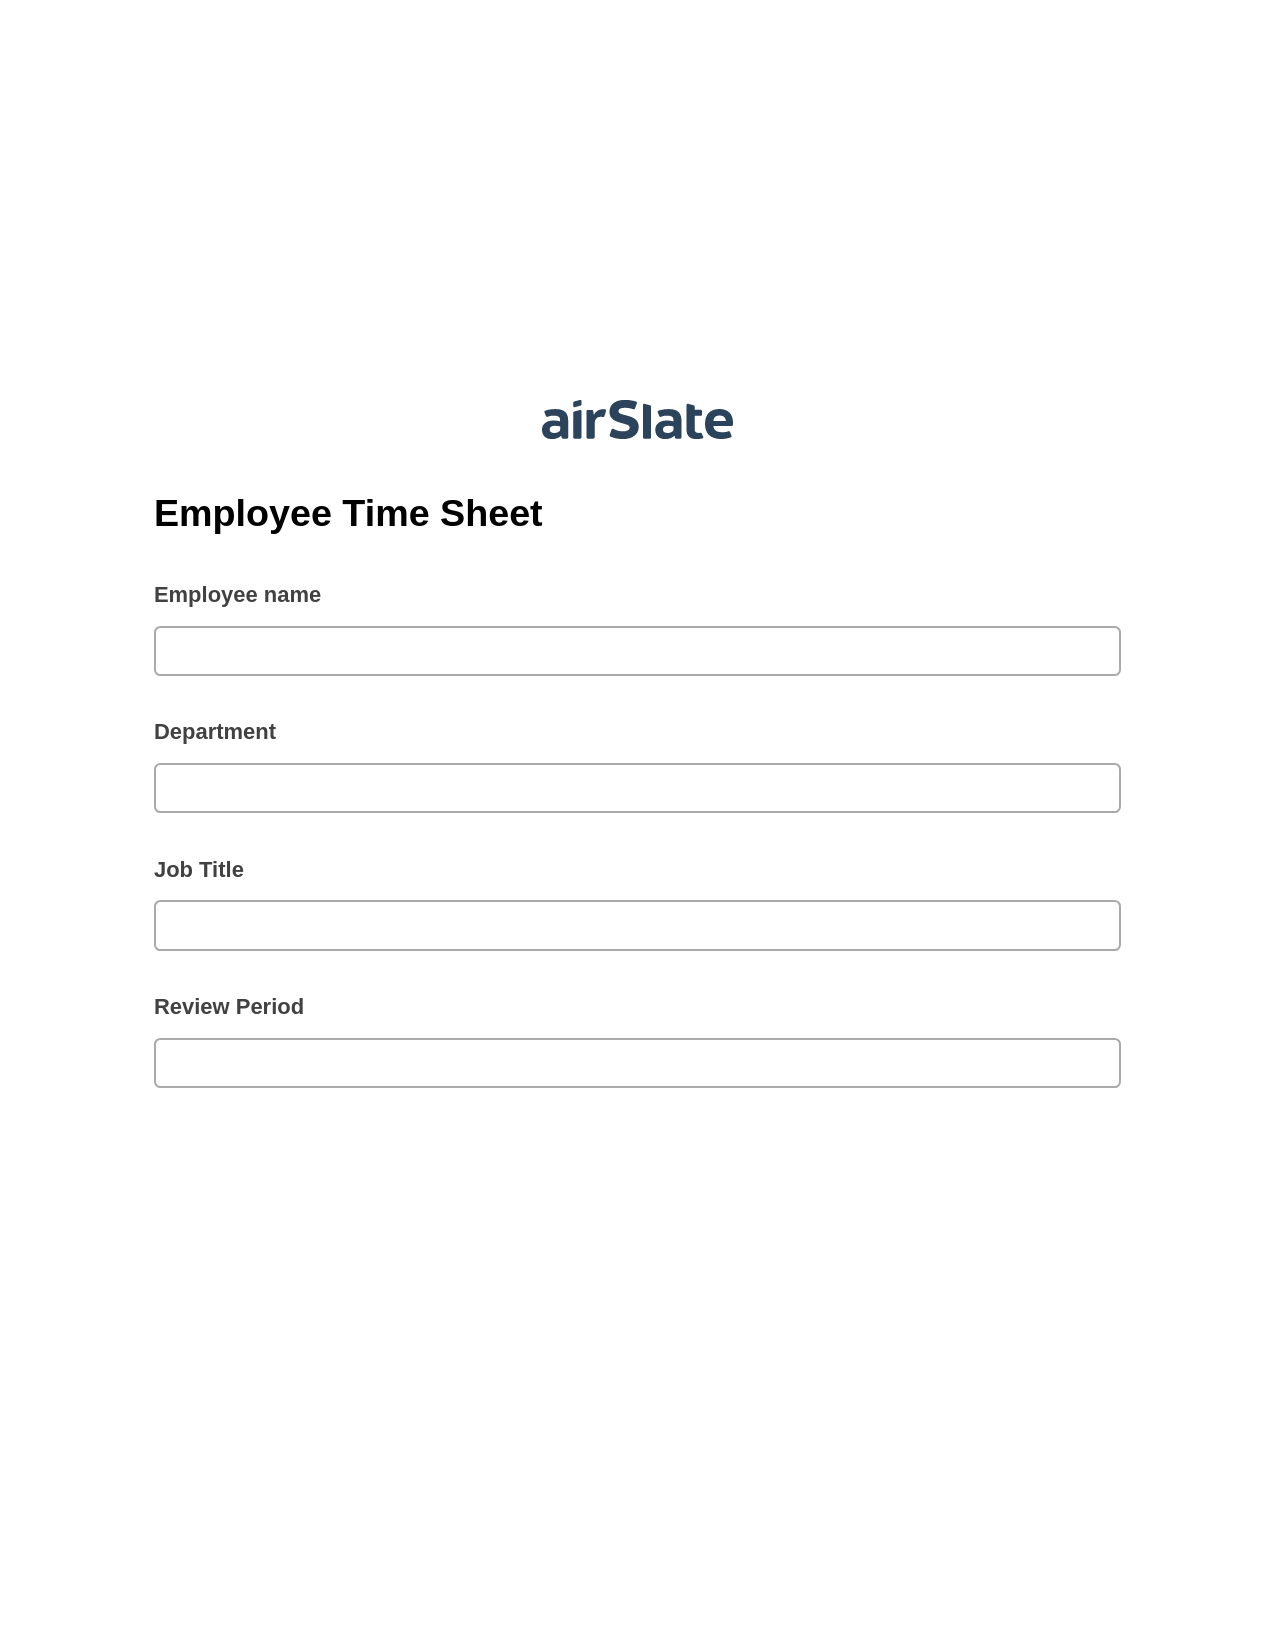 Employee Time Sheet Pre-fill from Salesforce Records with SOQL Bot, Update Audit Trail Bot, Email Notification Postfinish Bot